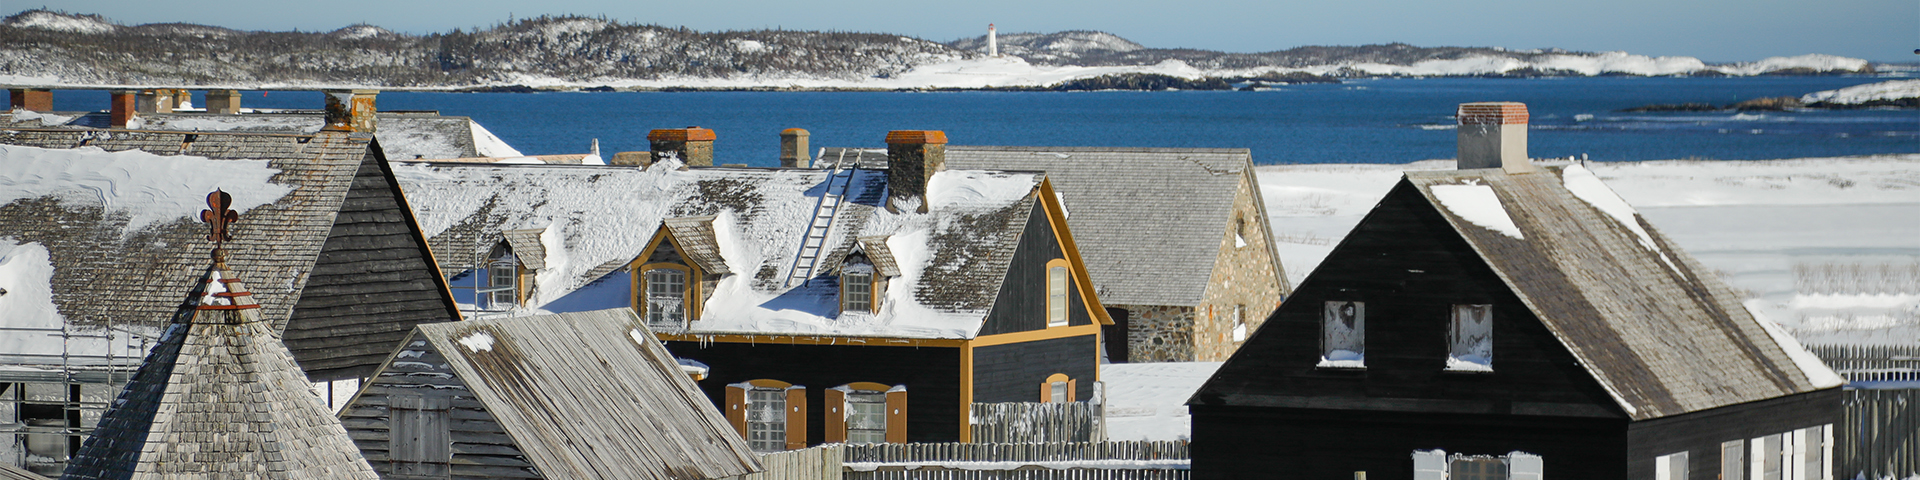 Overlooking snow covered rooftops at the Fortress of Louisbourg National Historic Site. In the distance you can see a lighthouse. 